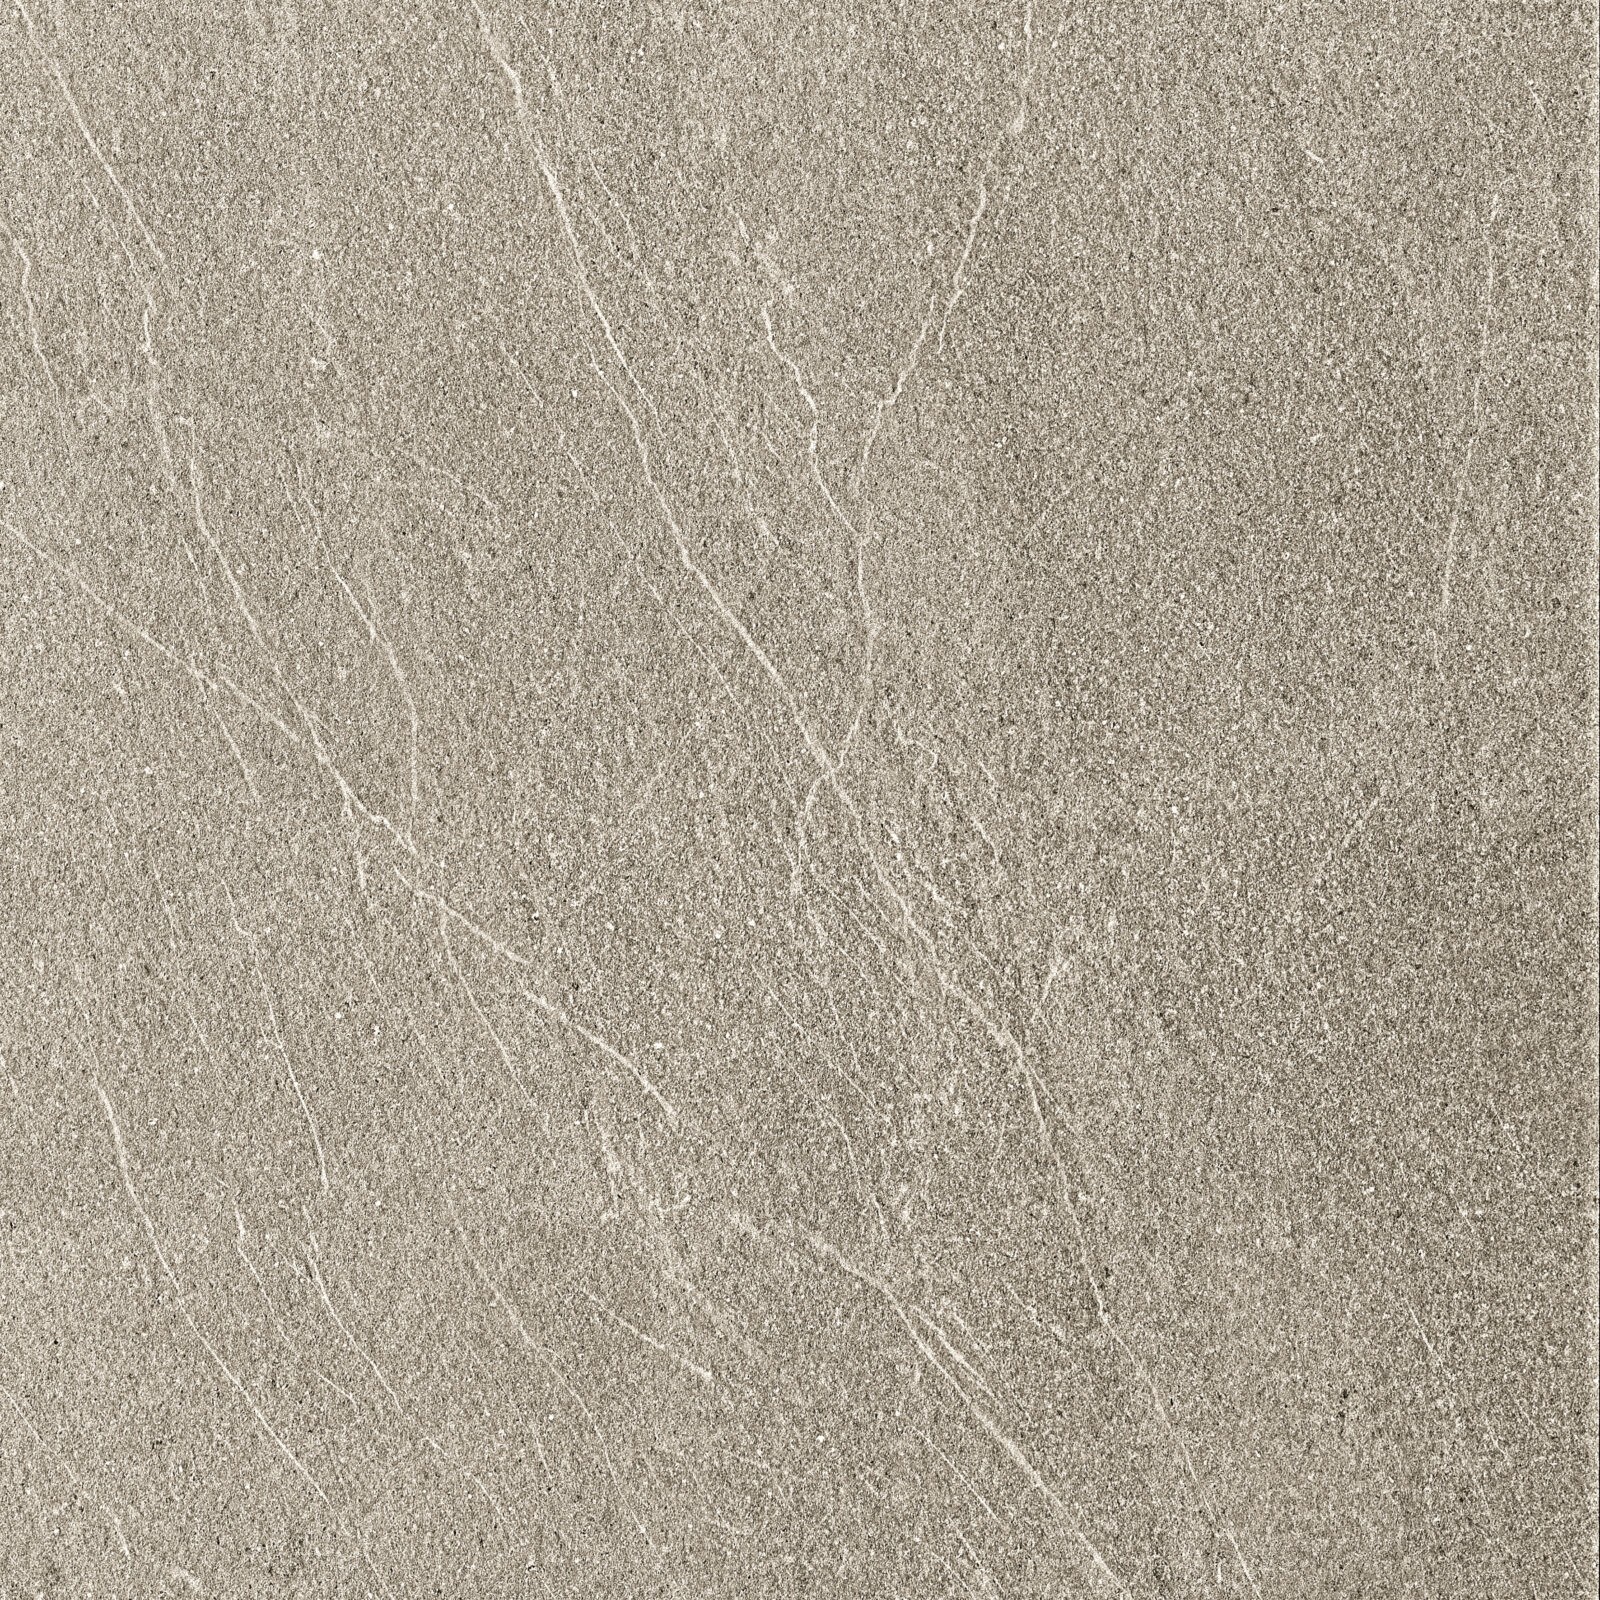 Craven Dunnill CDLG102 Hartington Taupe Natural Floor Tile 600x600mm